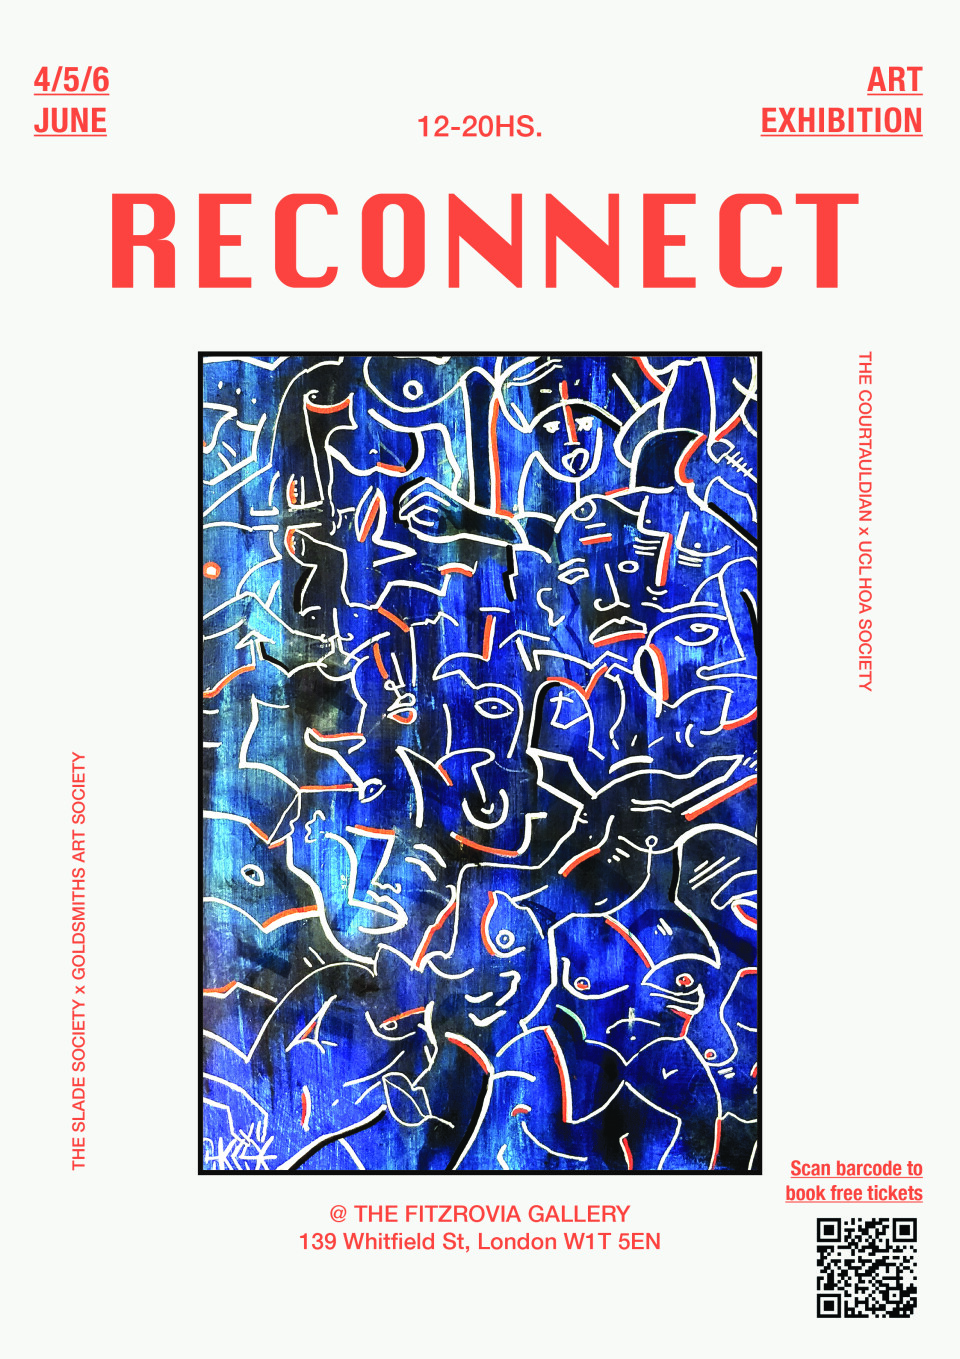 RECONNECT POSTER